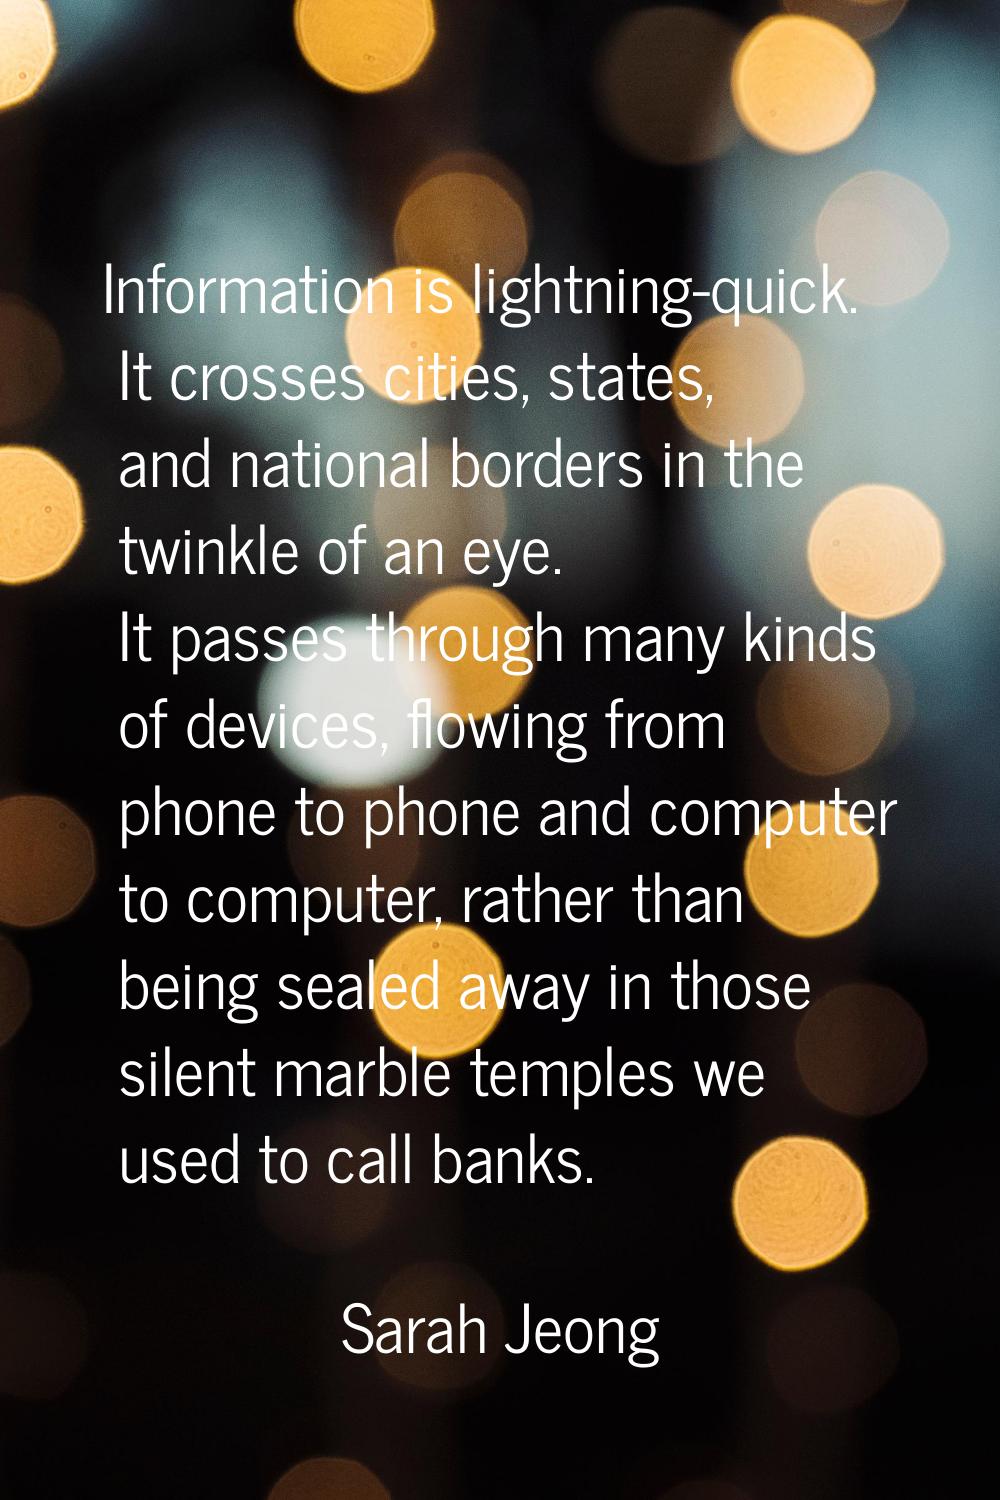 Information is lightning-quick. It crosses cities, states, and national borders in the twinkle of a